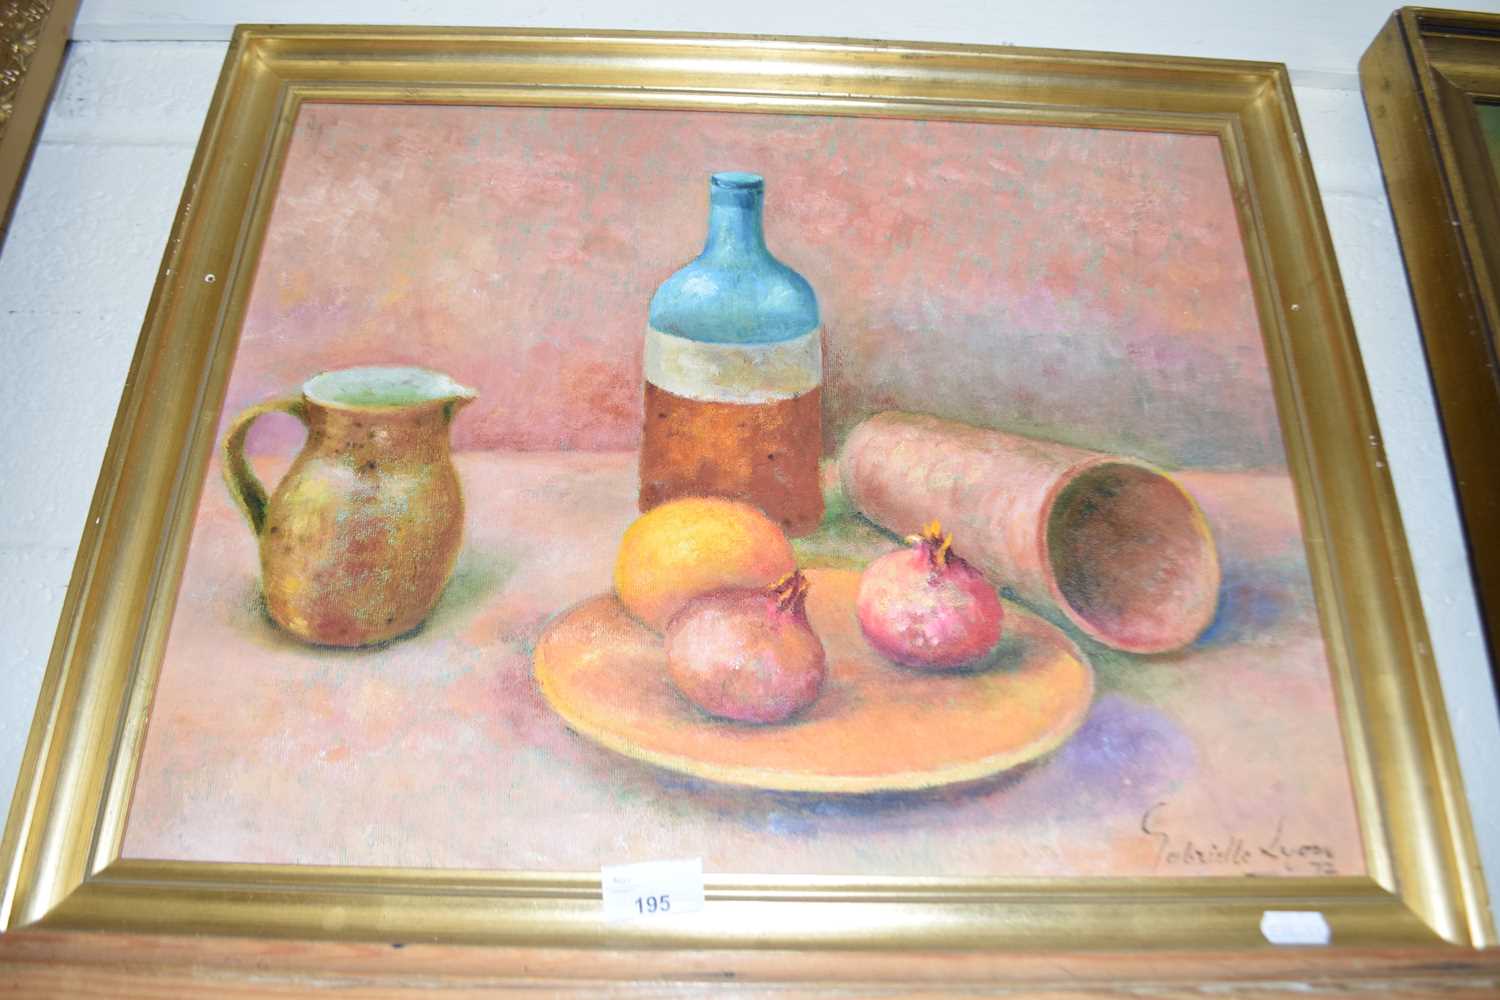 GABRIELLE LYON STILL LIFE STUDY OF POMEGRANATES AND ITEMS ON A TABLE, OIL ON BOARD, GILT FRAMED